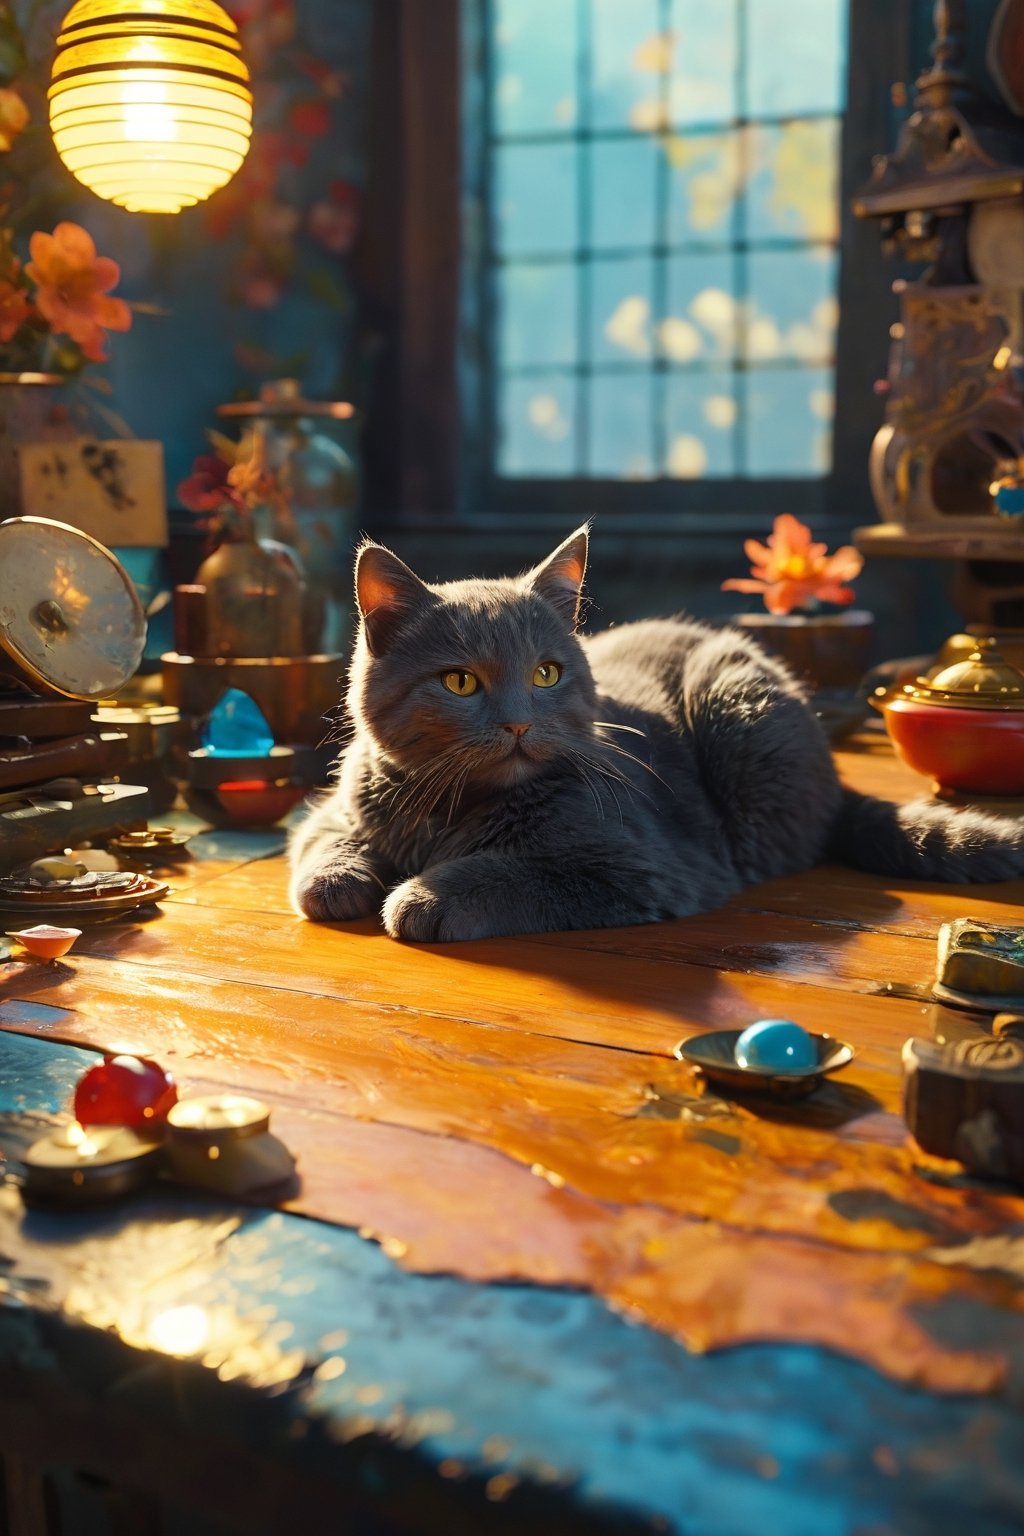 color photo of a captivating stop-motion video animation inspired by the renowned artist Fyodor Rokotov. This enchanting scene, currently trending on Polycount, features a black cat gracefully laying on top of a table. The stop-motion film, reminiscent of the 1924 era, captures the character of the cat in a top-down view, creating a unique perspective that adds depth and intrigue to the composition. The dancing character, with its Soviet influences, exudes an air of nostalgia and whimsy. The animation, created in a Japanese anime style, showcases the artistry of anime captura techniques, combining the charm of traditional cel animation with the fluidity of modern technology. The video still, taken from this captivating stop-motion animation, serves as a delightful screensaver, perfect for lovers of children's animated films and fans of Japanese anime. This enchanting scene invites viewers of all ages to immerse themselves in the magical world of animated storytelling
,

concept art
19%
a character portrait
18%
a screenshot
17%
computer graphics
17%
a hologram
17%
Artist
by Kamagurka
by Kamagurka
21%
by Murakami
21%
by Watanabe Kazan
21%
by Miyazaki
21%
by Kamāl ud-Dīn Behzād
20%
Movement
aestheticism
aestheticism
20%
superflat
20%
vanitas
19%
furry art
19%
remodernism
19%
Trending
deviantart contest winner
deviantart contest winner
18%
shutterstock contest winner
18%
polycount
18%
Artstation
18%
tumblr
17%
Flavor
fat chibi grey cat
fat chibi grey cat
27%
whole cat body
27%
anime visual of a cute cat
26%
the dark god of cats
25%
fat cat
25%